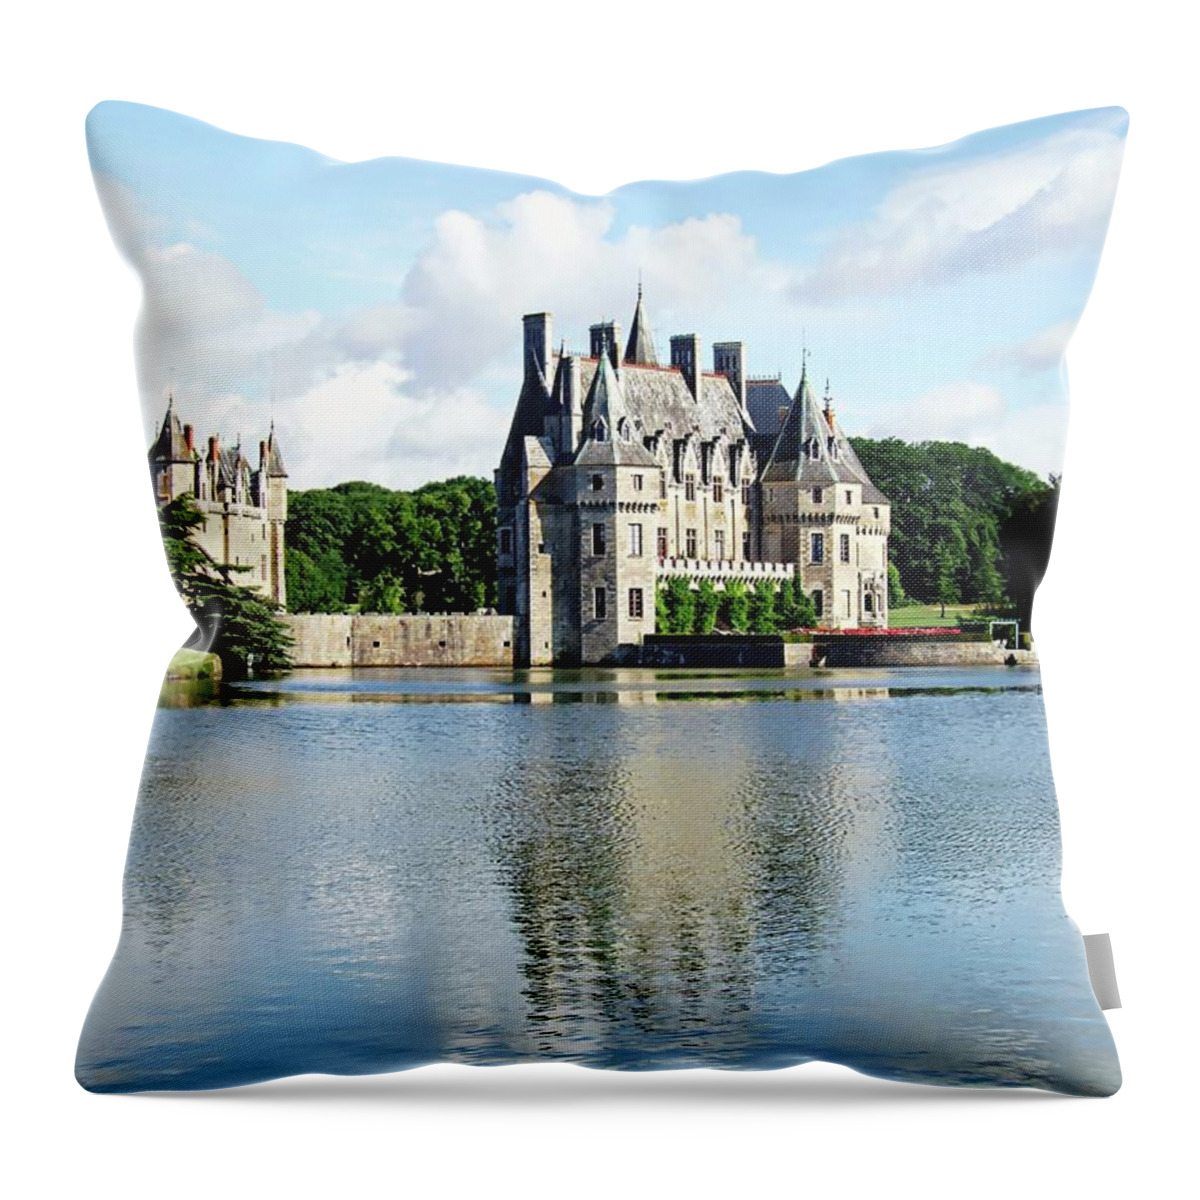 Europe Throw Pillow featuring the photograph Chateau De La Bretesche - Missillac, France by Joseph Hendrix